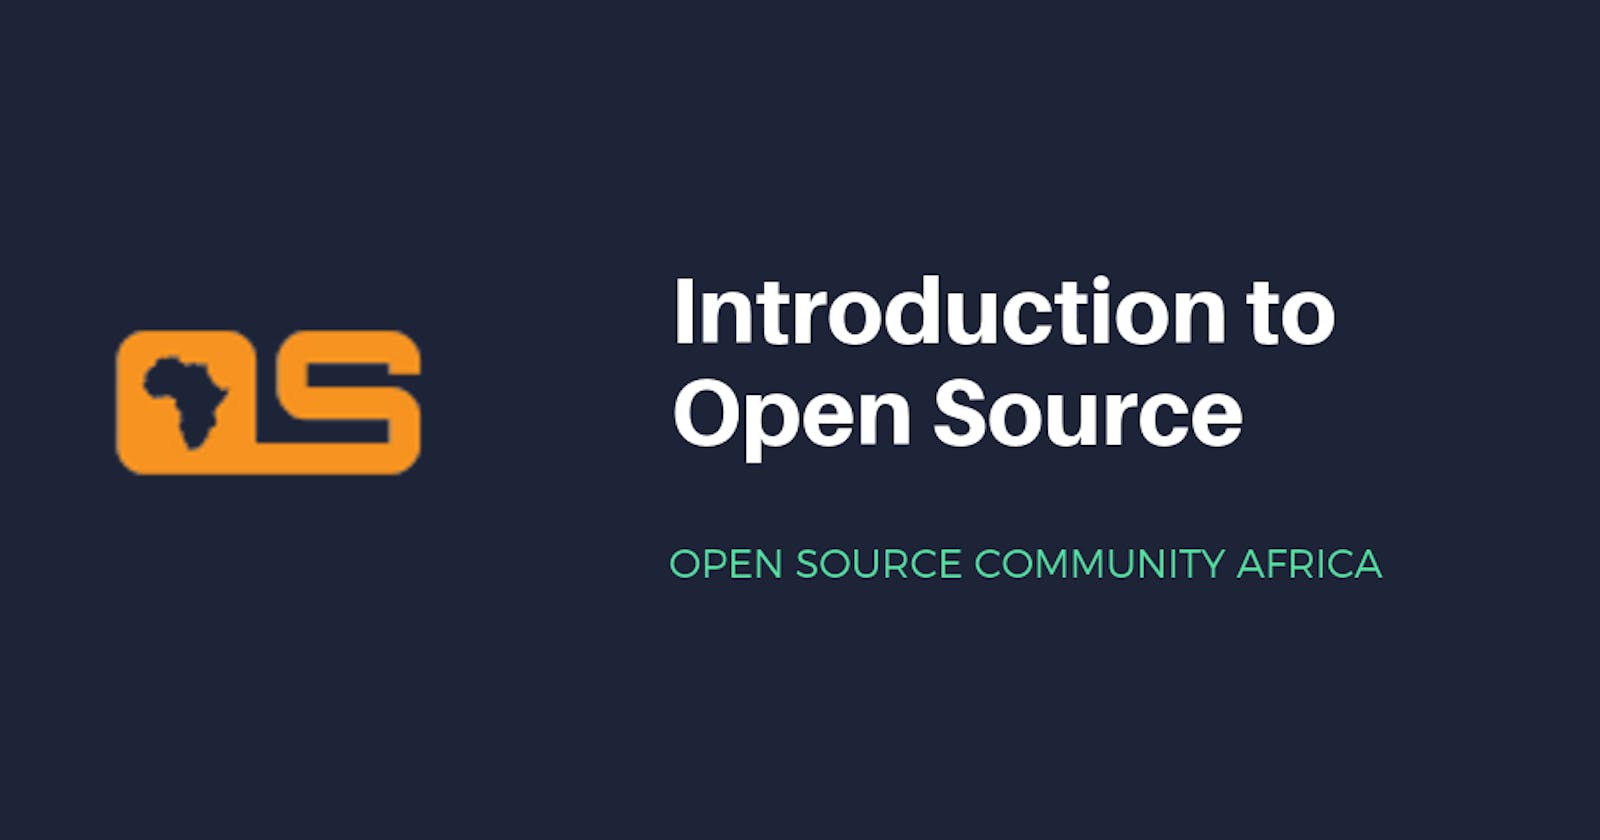 Introduction to Open Source